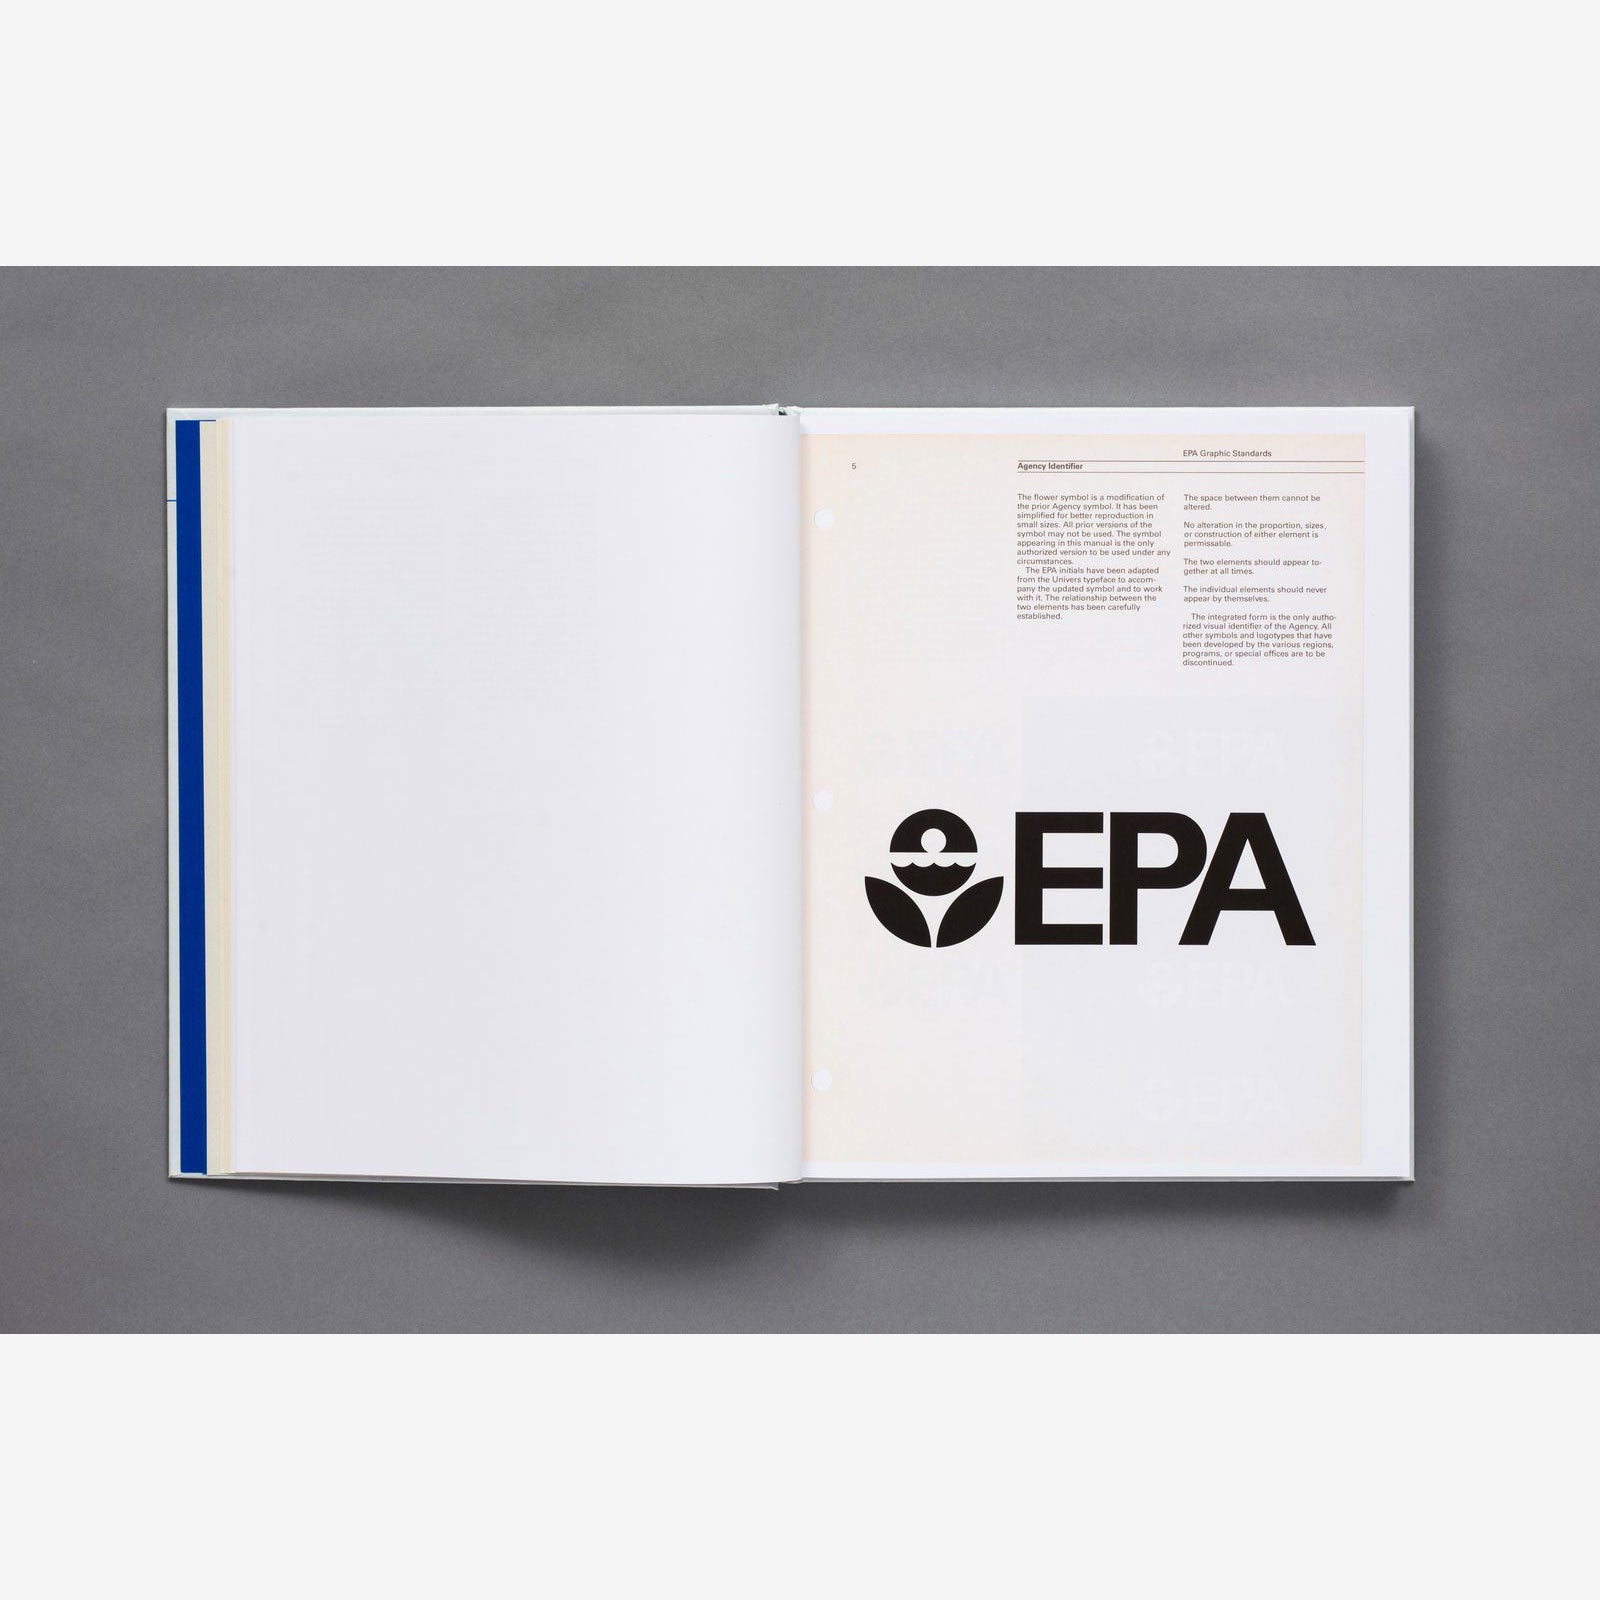 EPA Graphic Standards System